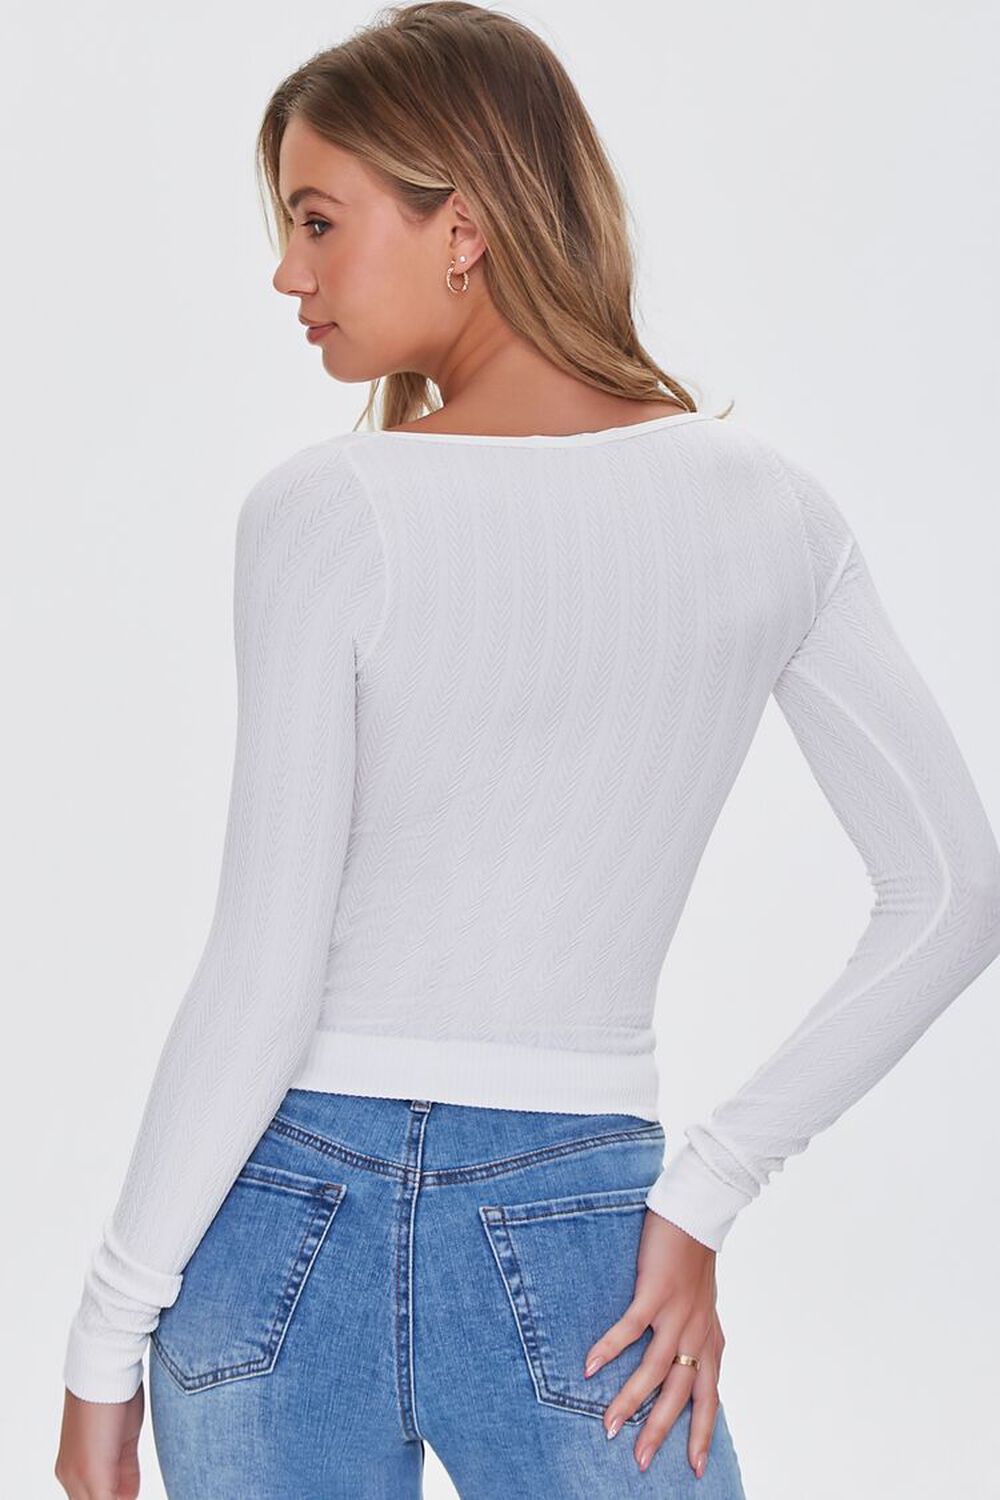 IVORY Ribbed Knit Scoop Top, image 3